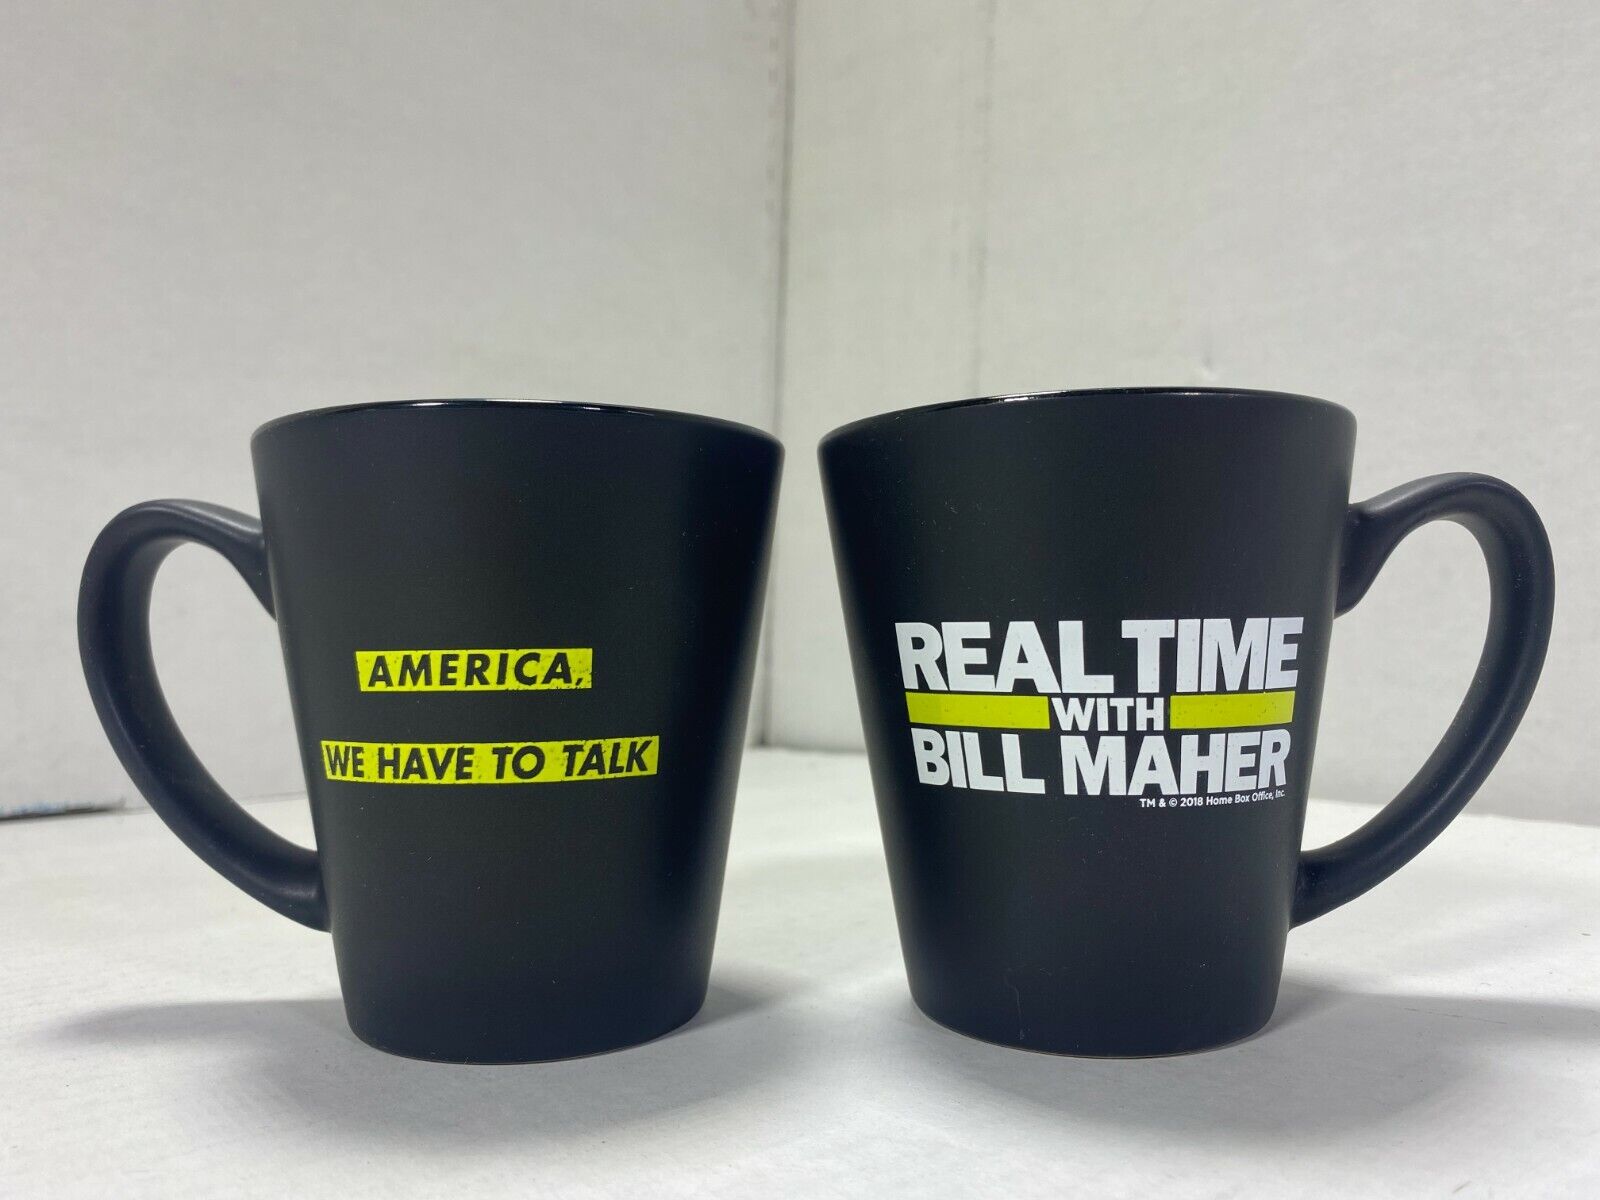 Real Time with Bill Maher America Talk Mug 2 MUGS SET NEW OFFICIAL MERCHANDISE